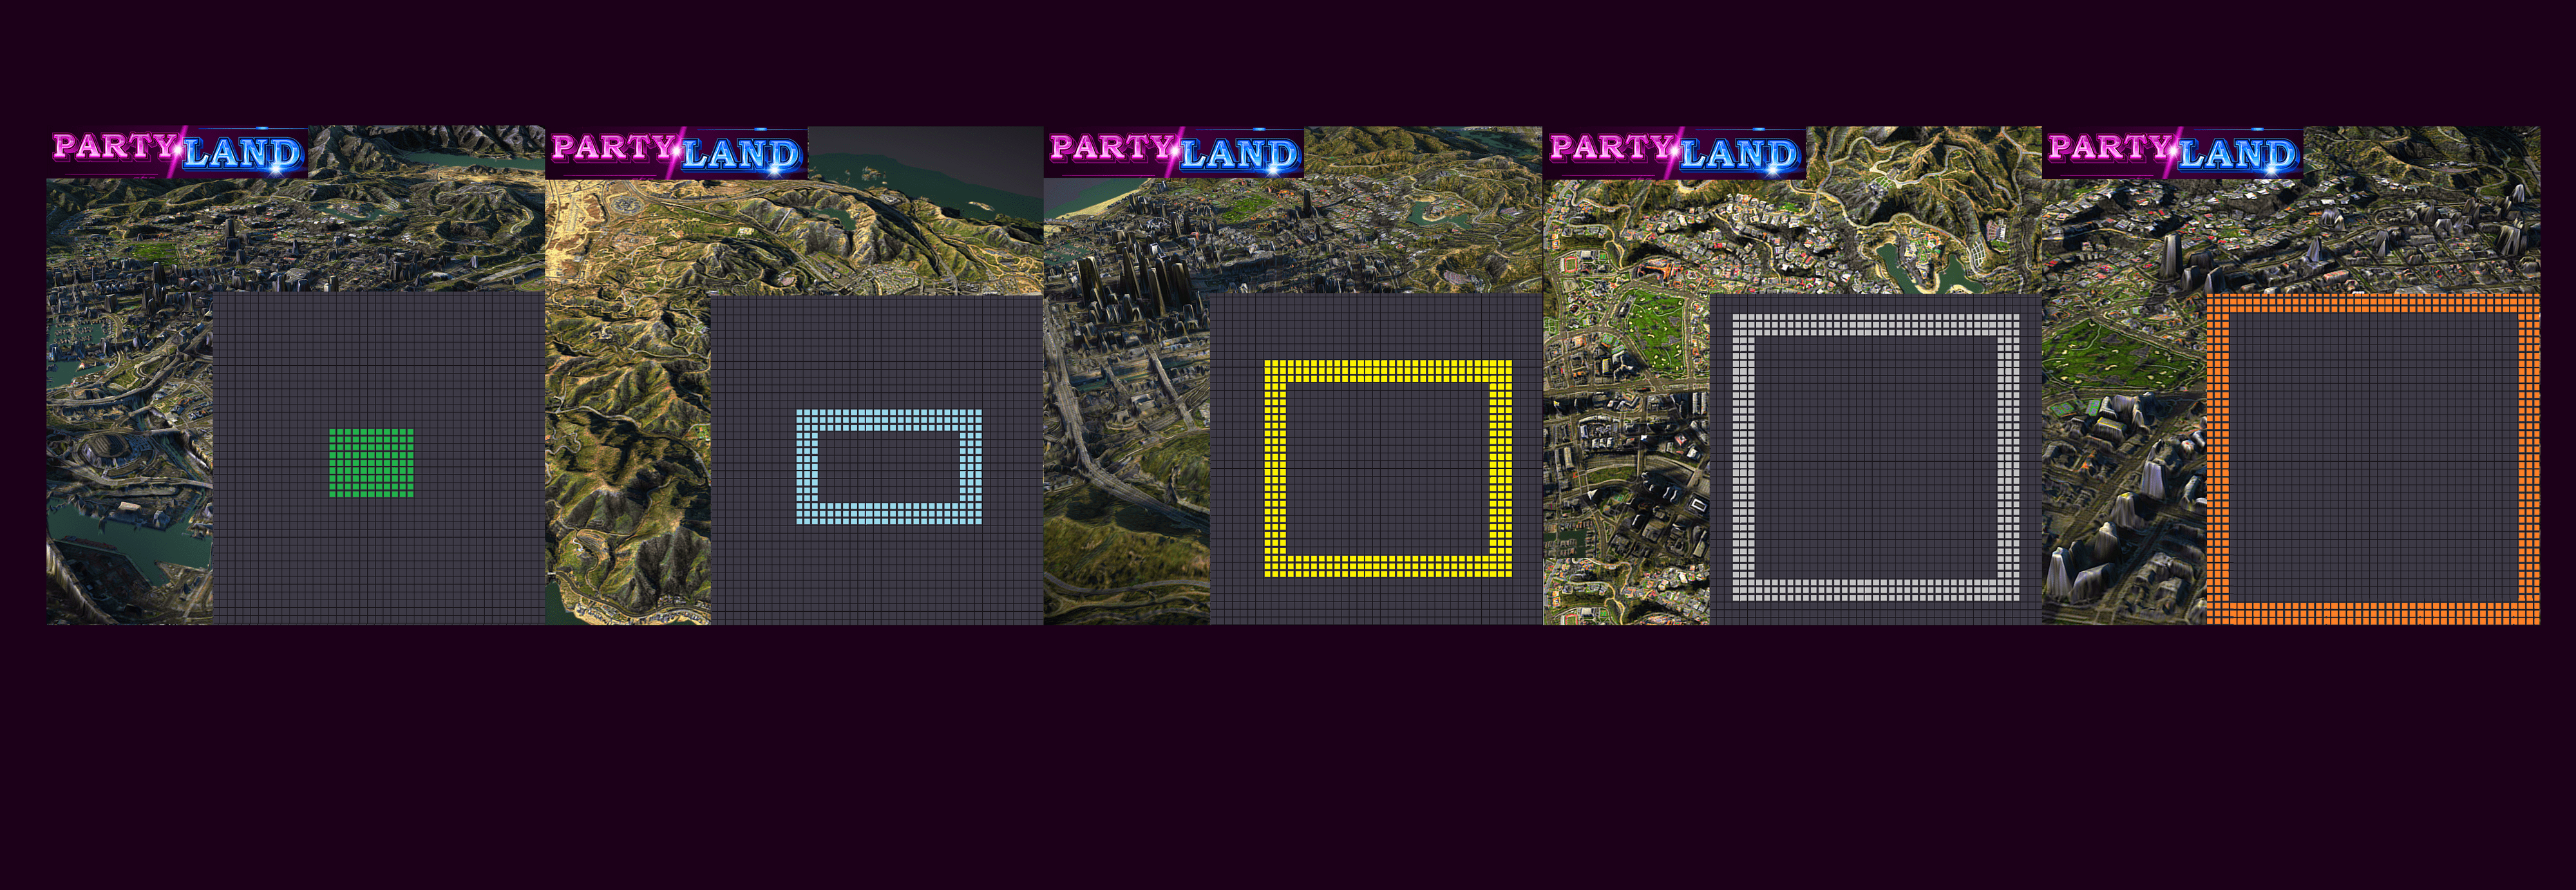 Partyland banner